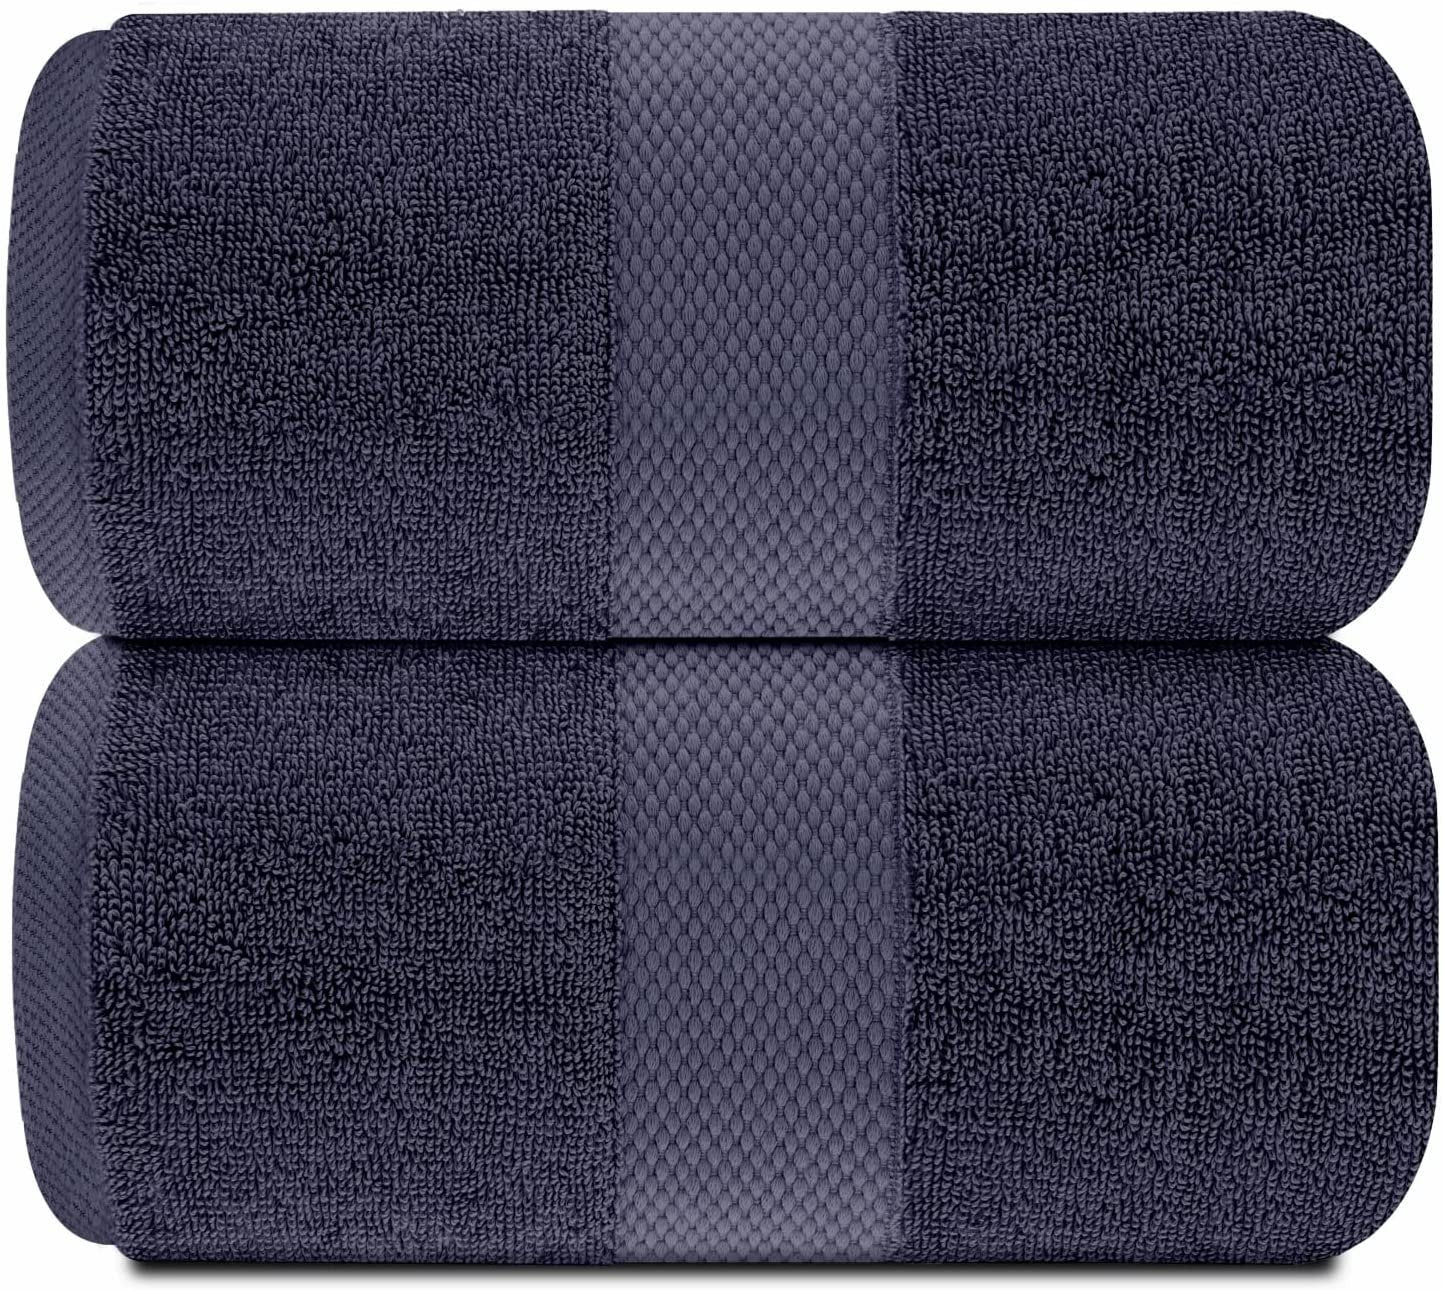 Extra Large Luxury Bath Sheet Towels 35x70 Green | Highly Absorbent Hotel Spa Collection | Free Ship